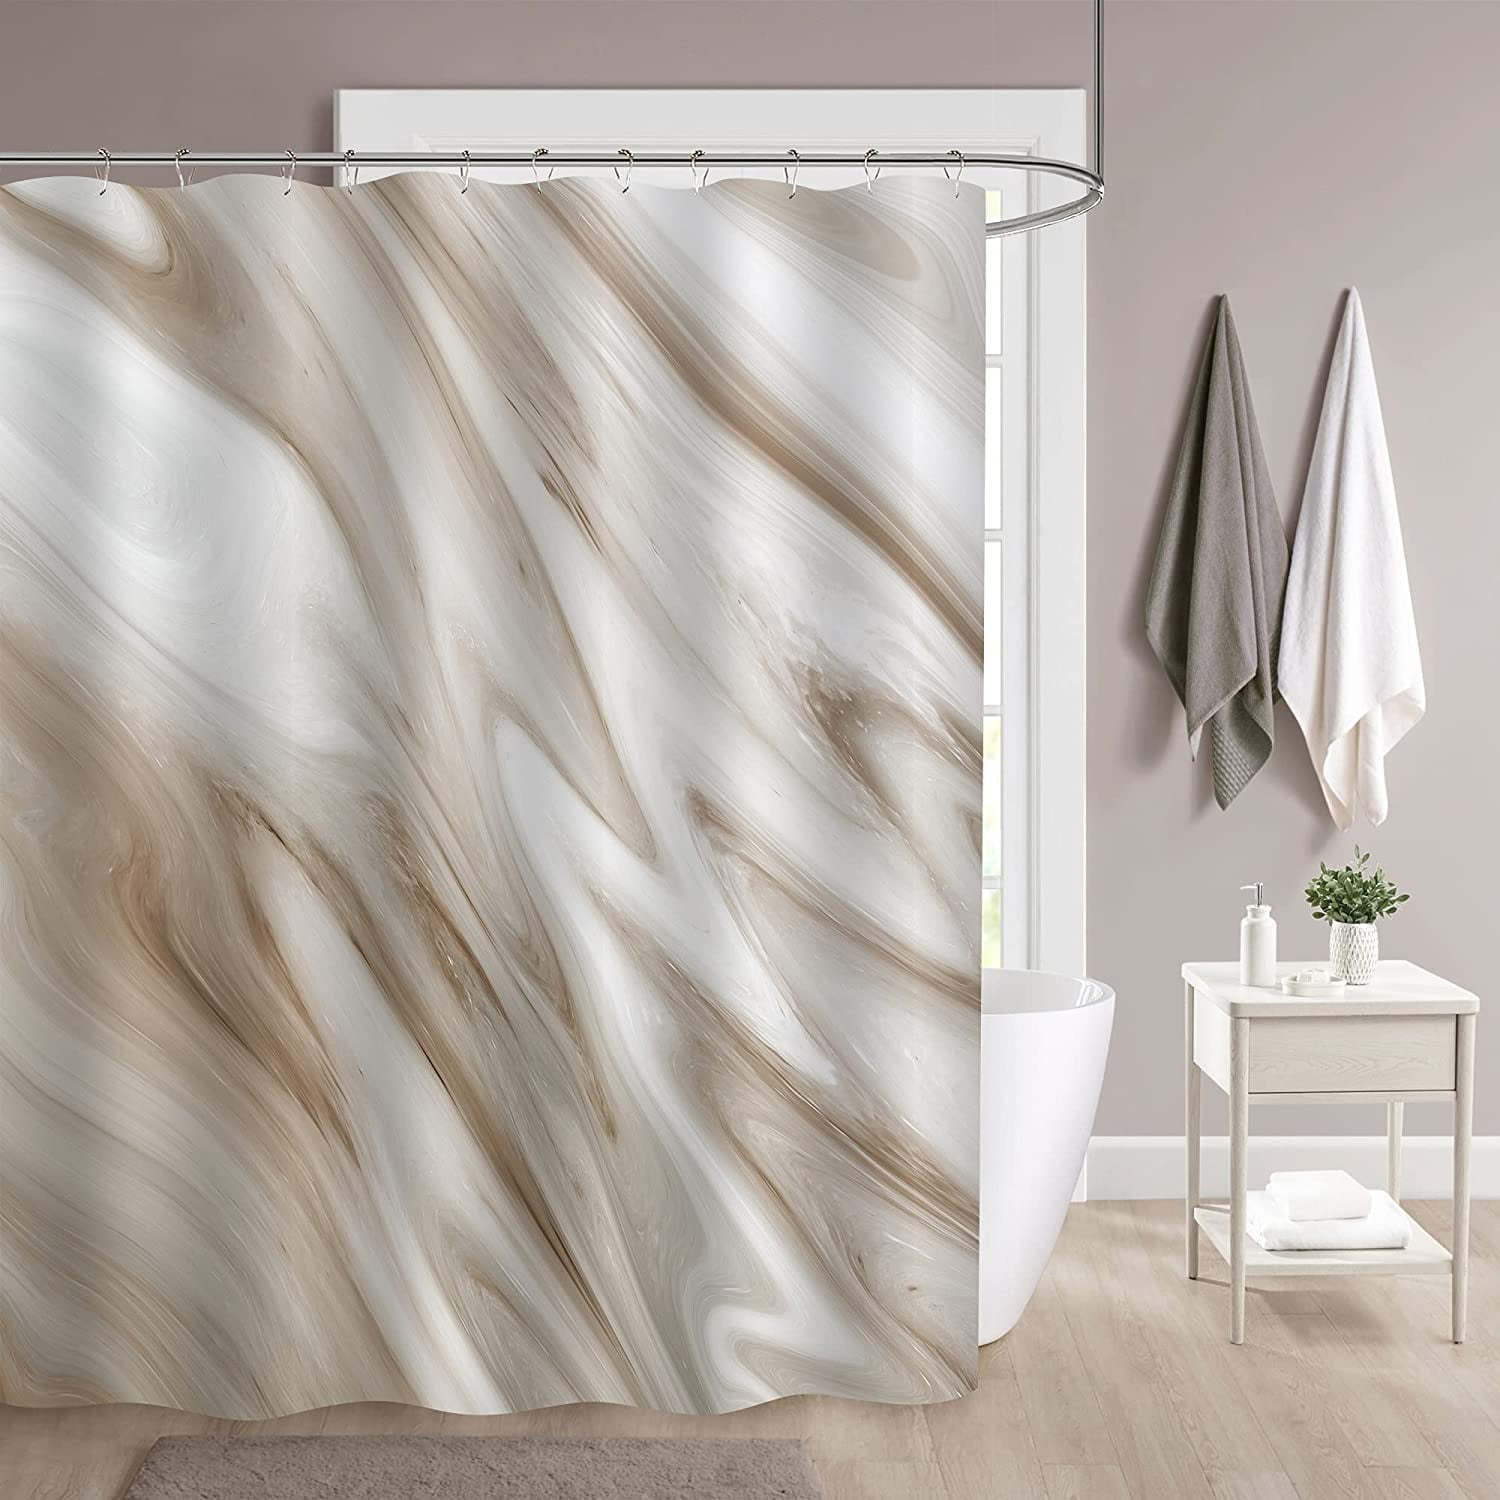 Home Ideas Marble Pattern Extra Long Bathroom Shower Curtain,72 x 84 White and Grey Polyester Fabric Bath Decorative Curtain